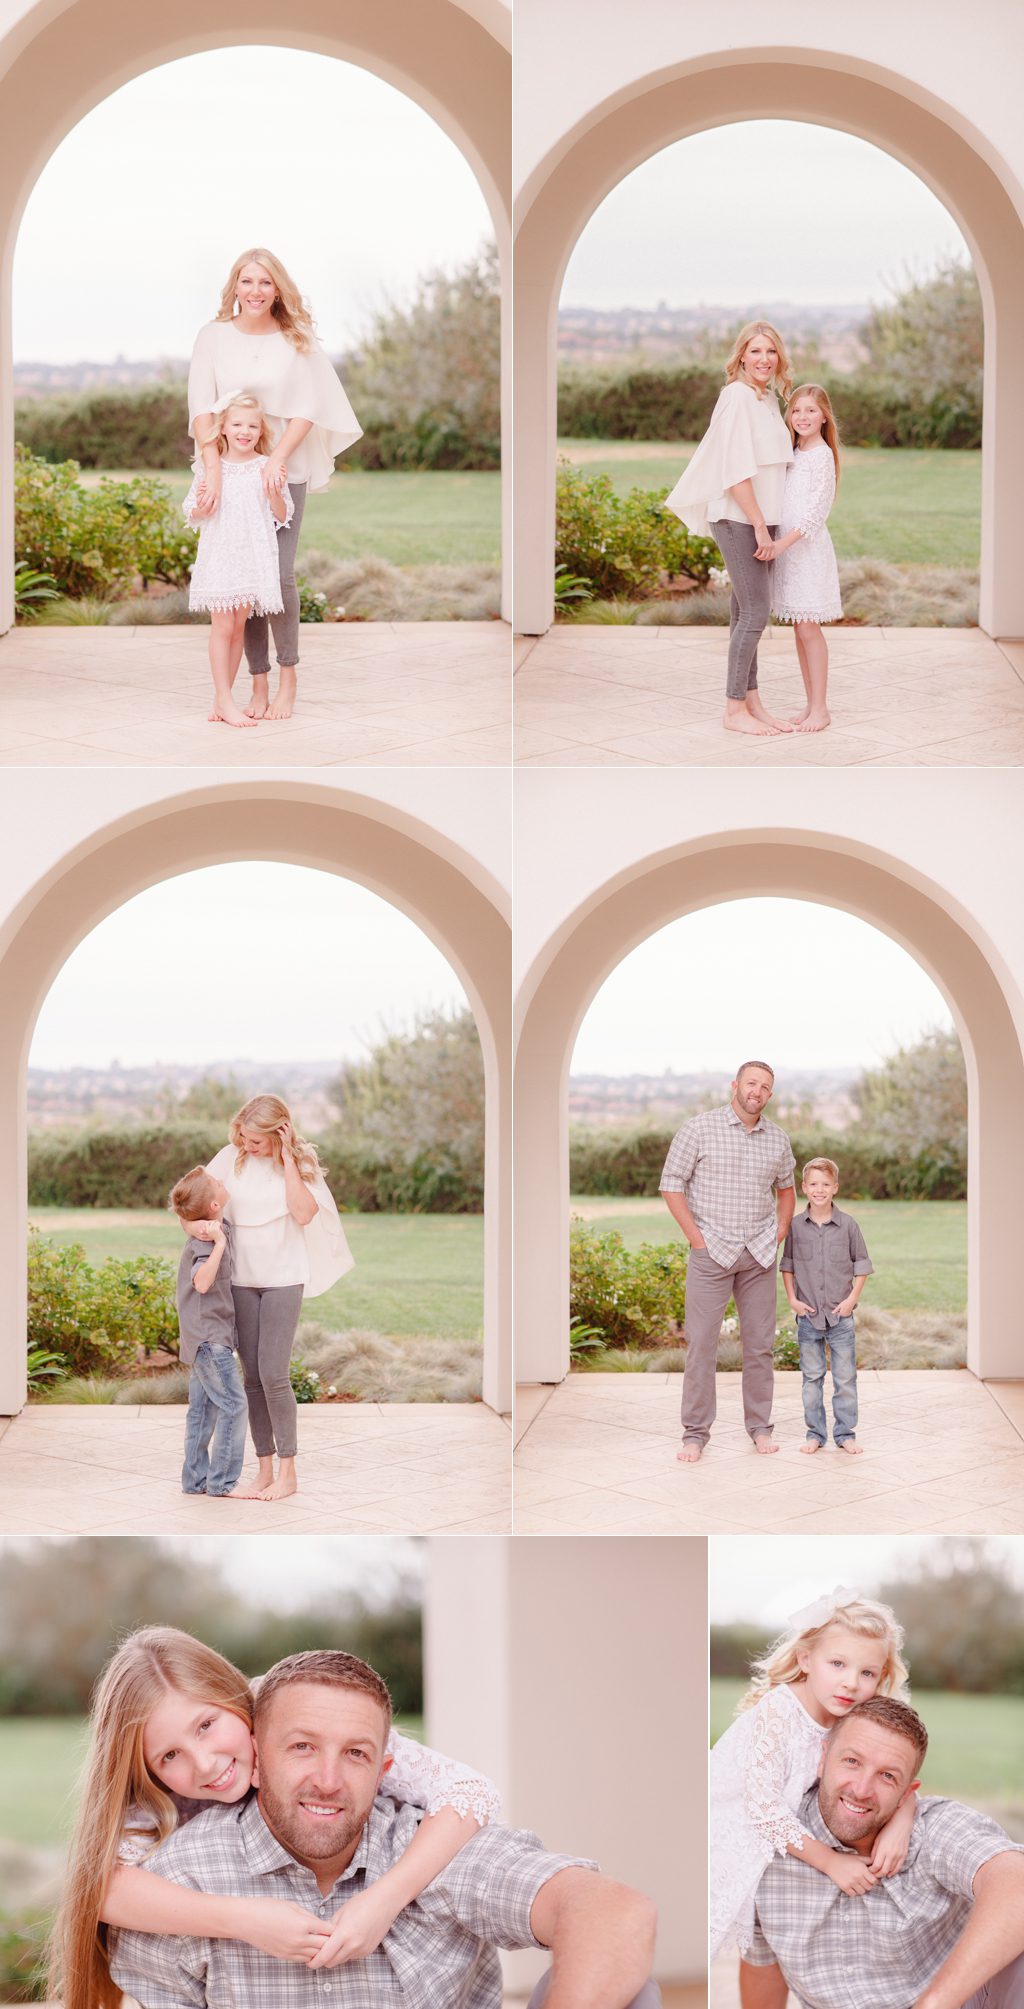 Photos of parents with their children in the family's yard in San Diego.